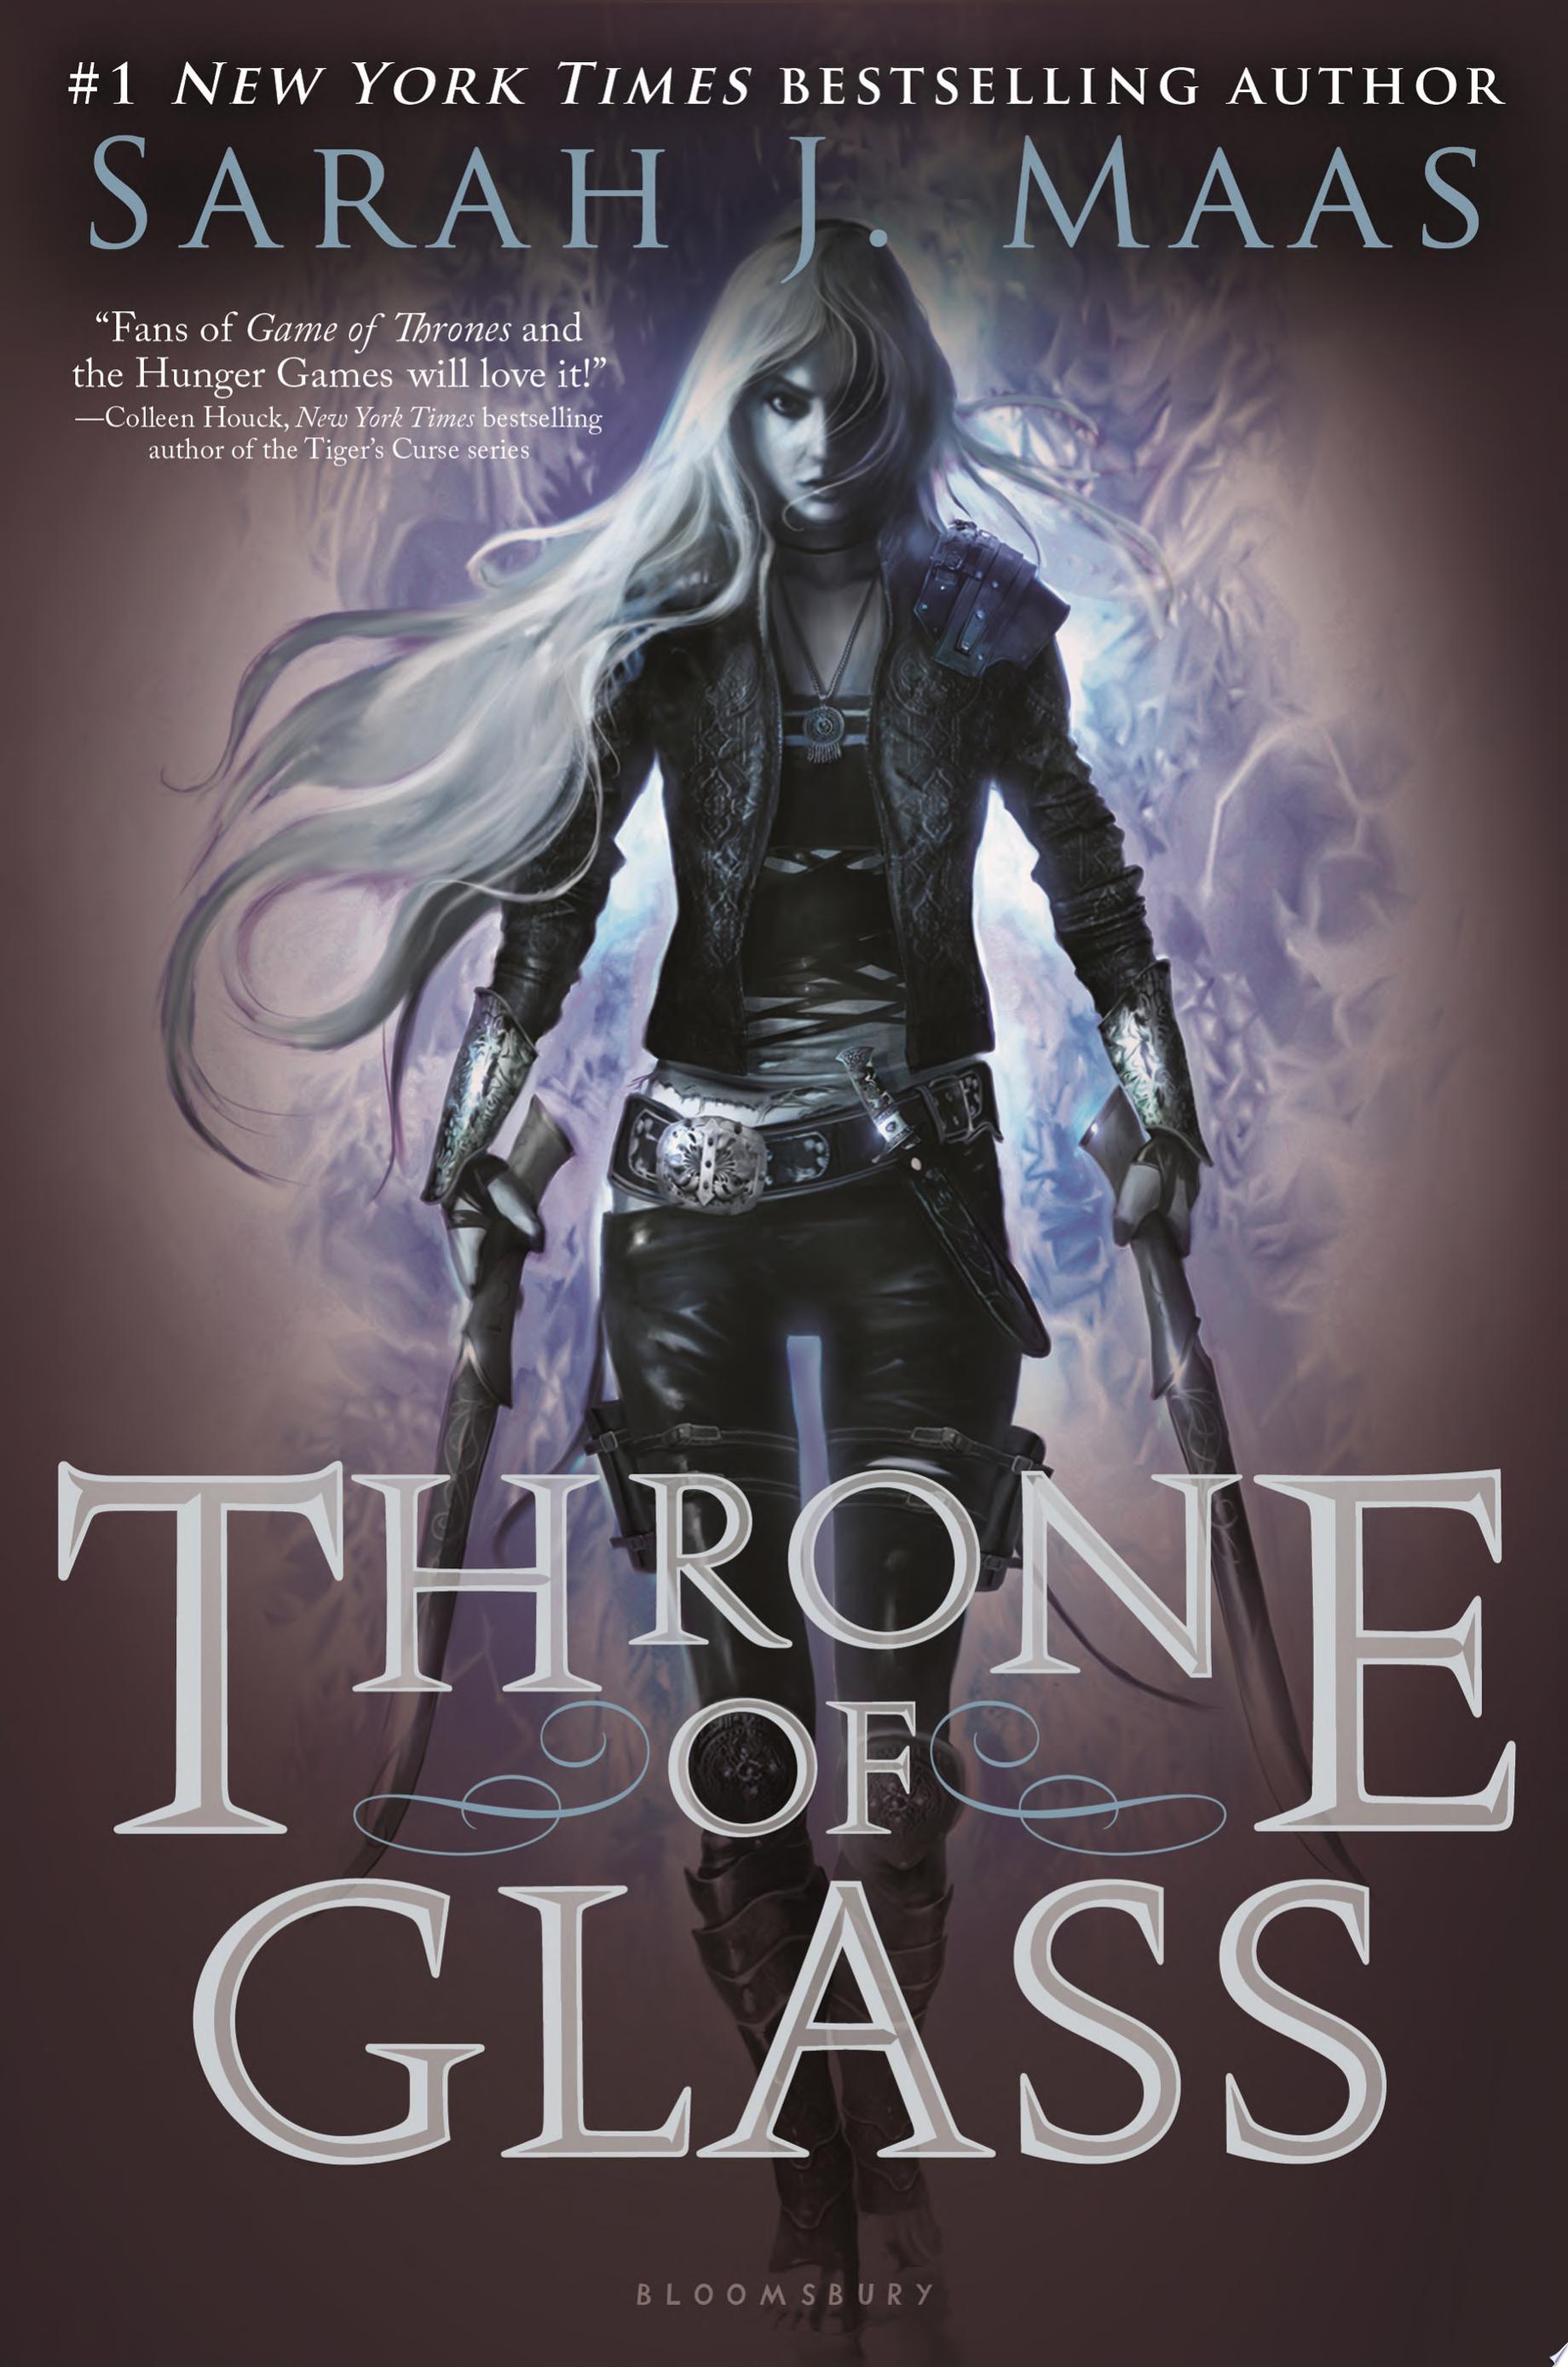 Image for "Throne of Glass"